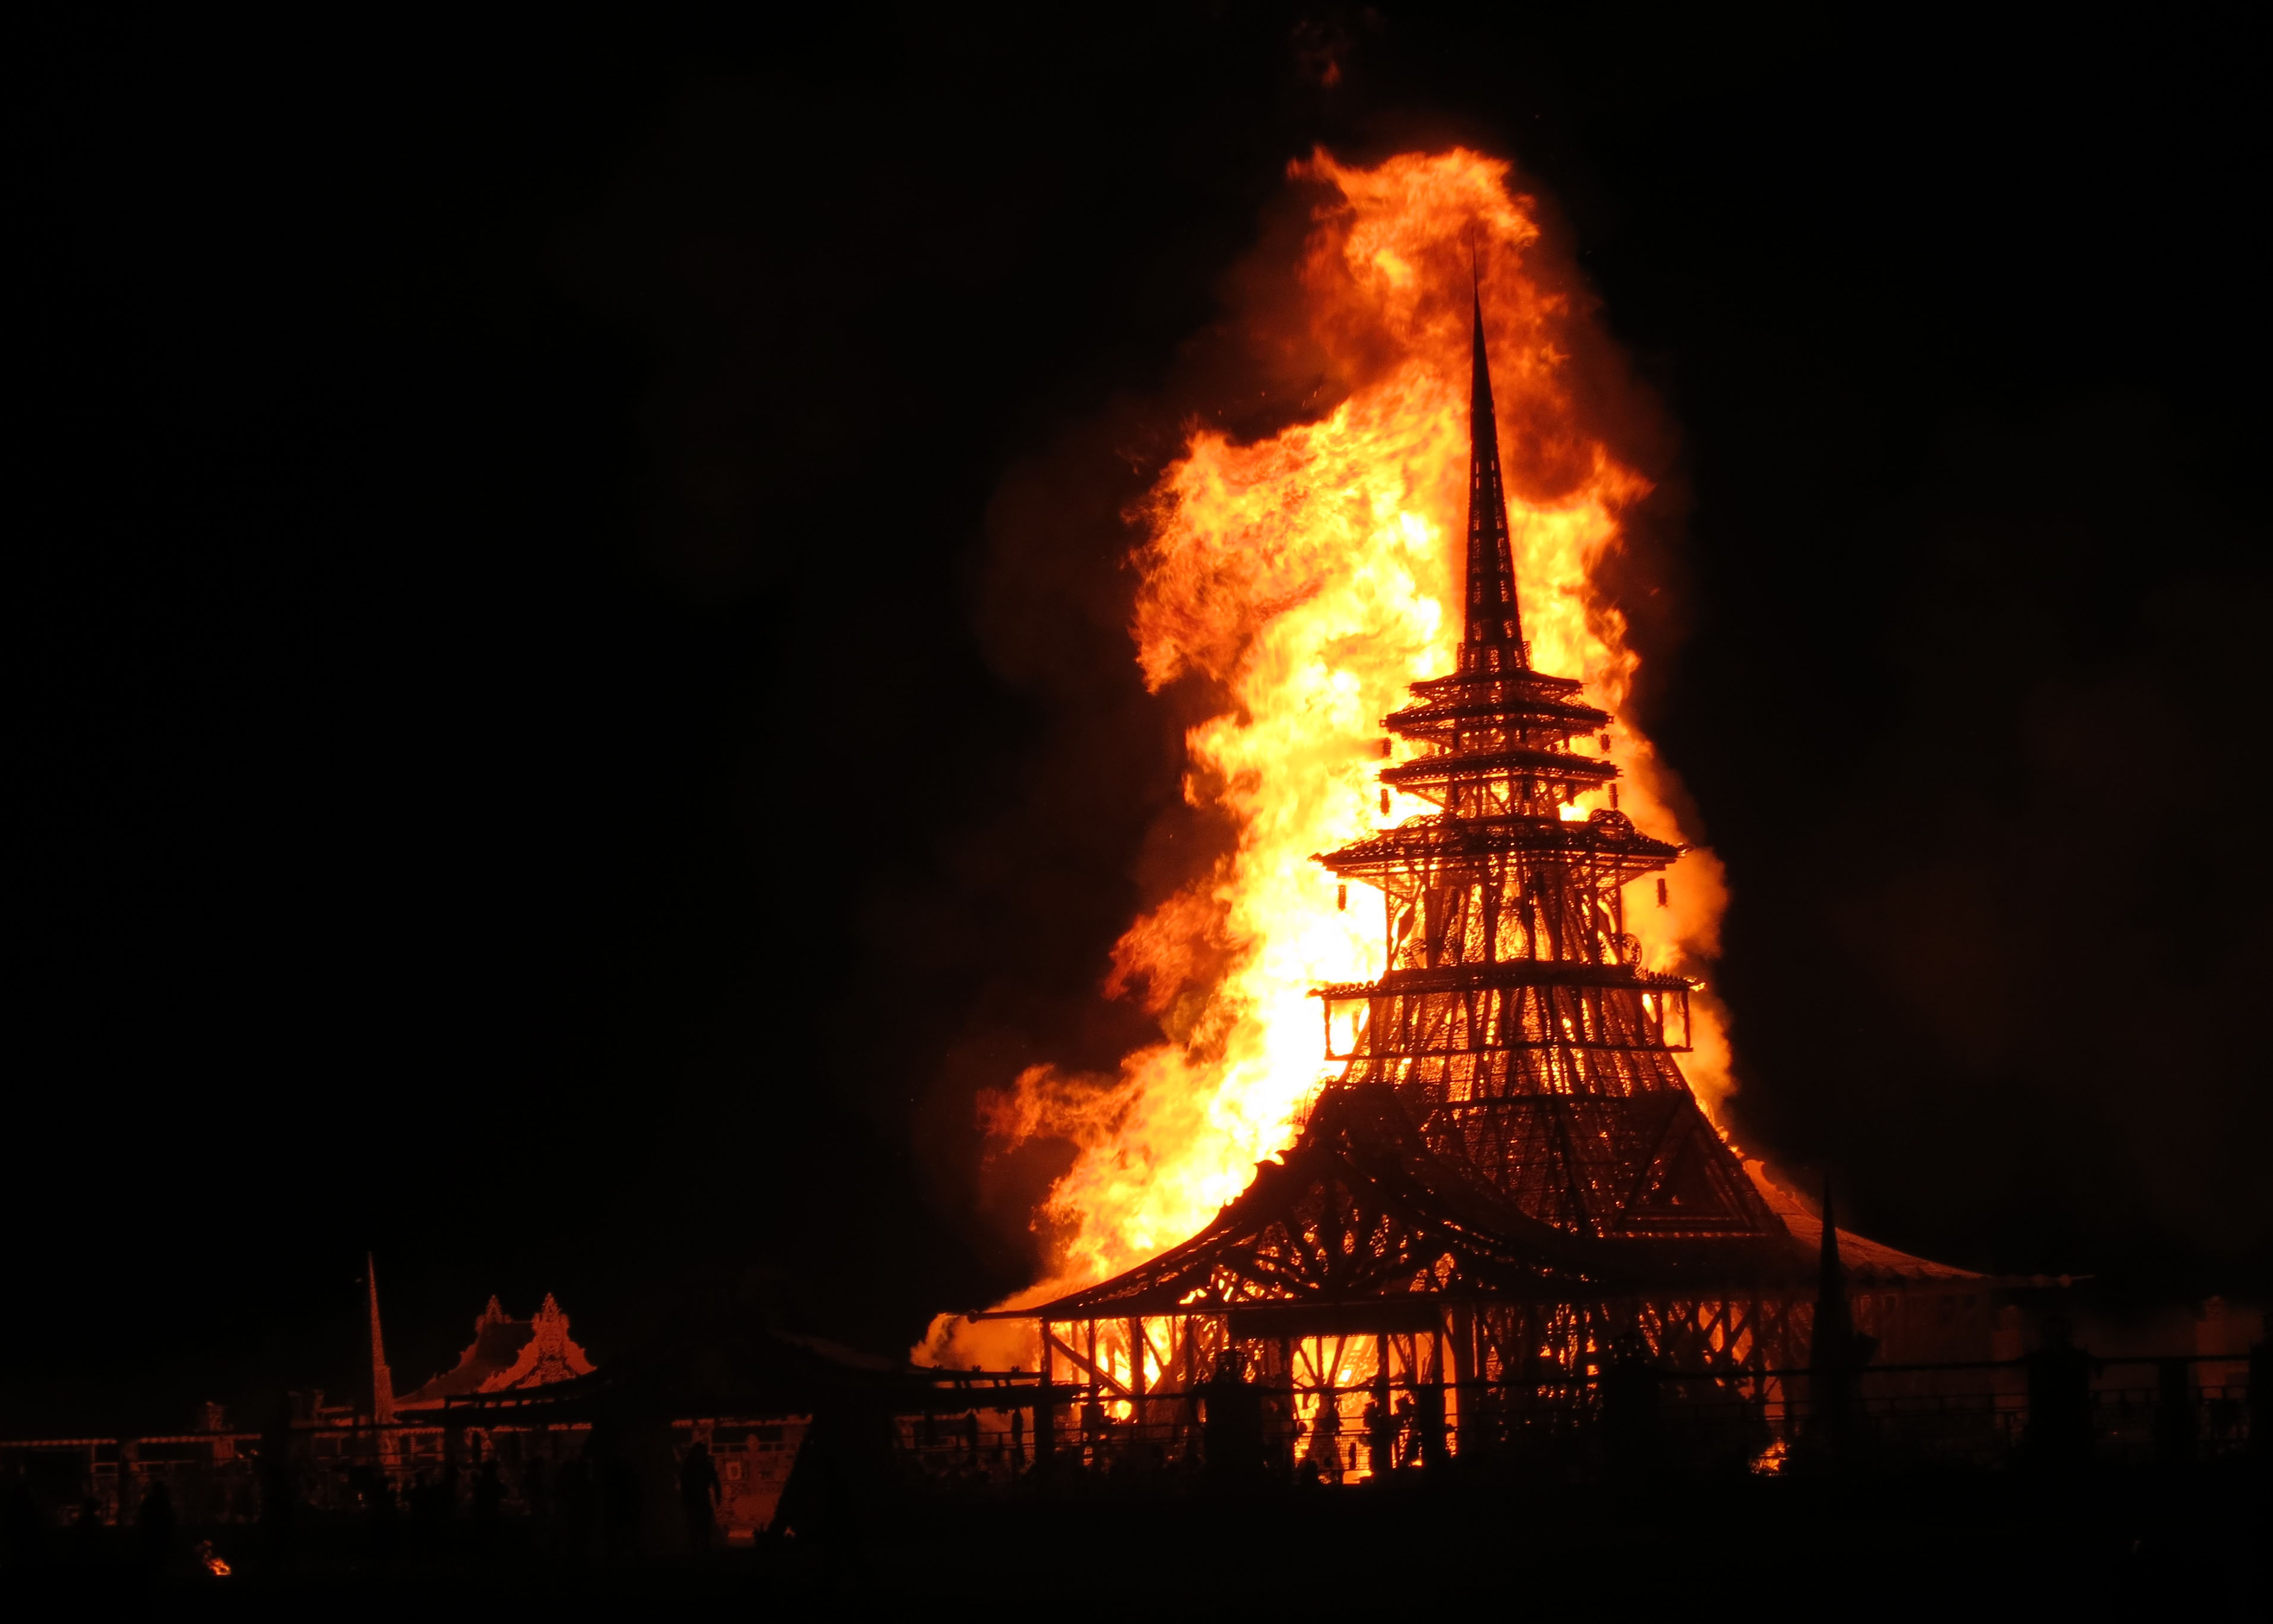 The burning of the Temple on Sunday night sends thousands of messages to loved ones wafting into the sky.